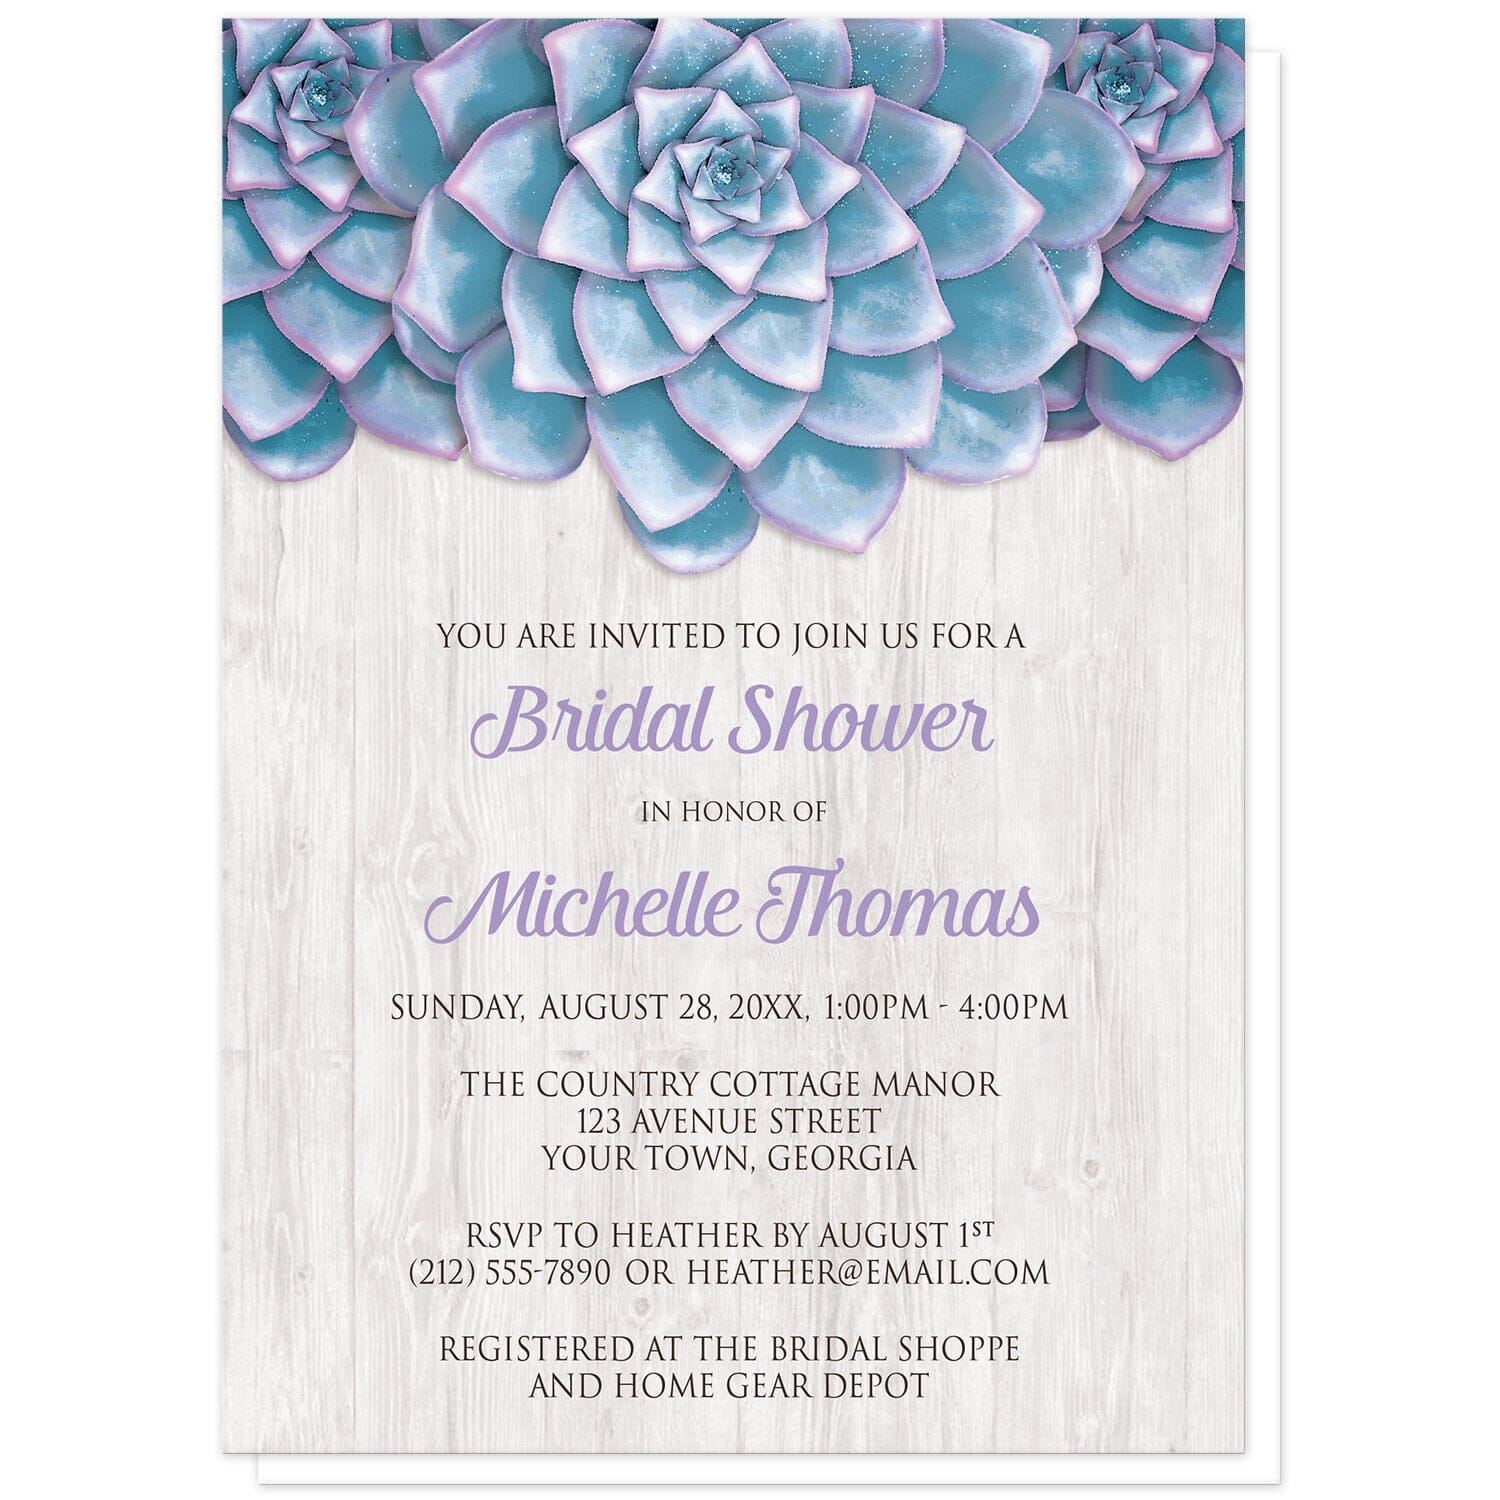 Blue Purple Succulent Whitewashed Wood Bridal Shower Invitations at Artistically Invited. Uniquely illustrated blue purple succulent whitewashed wood bridal shower invitations with three large and lovely blue succulents with purple tips along the top of the invitations. Your personalized bridal shower celebration details are custom printed in purple and dark gray over a light whitewashed wood background illustration below the blue succulents. 